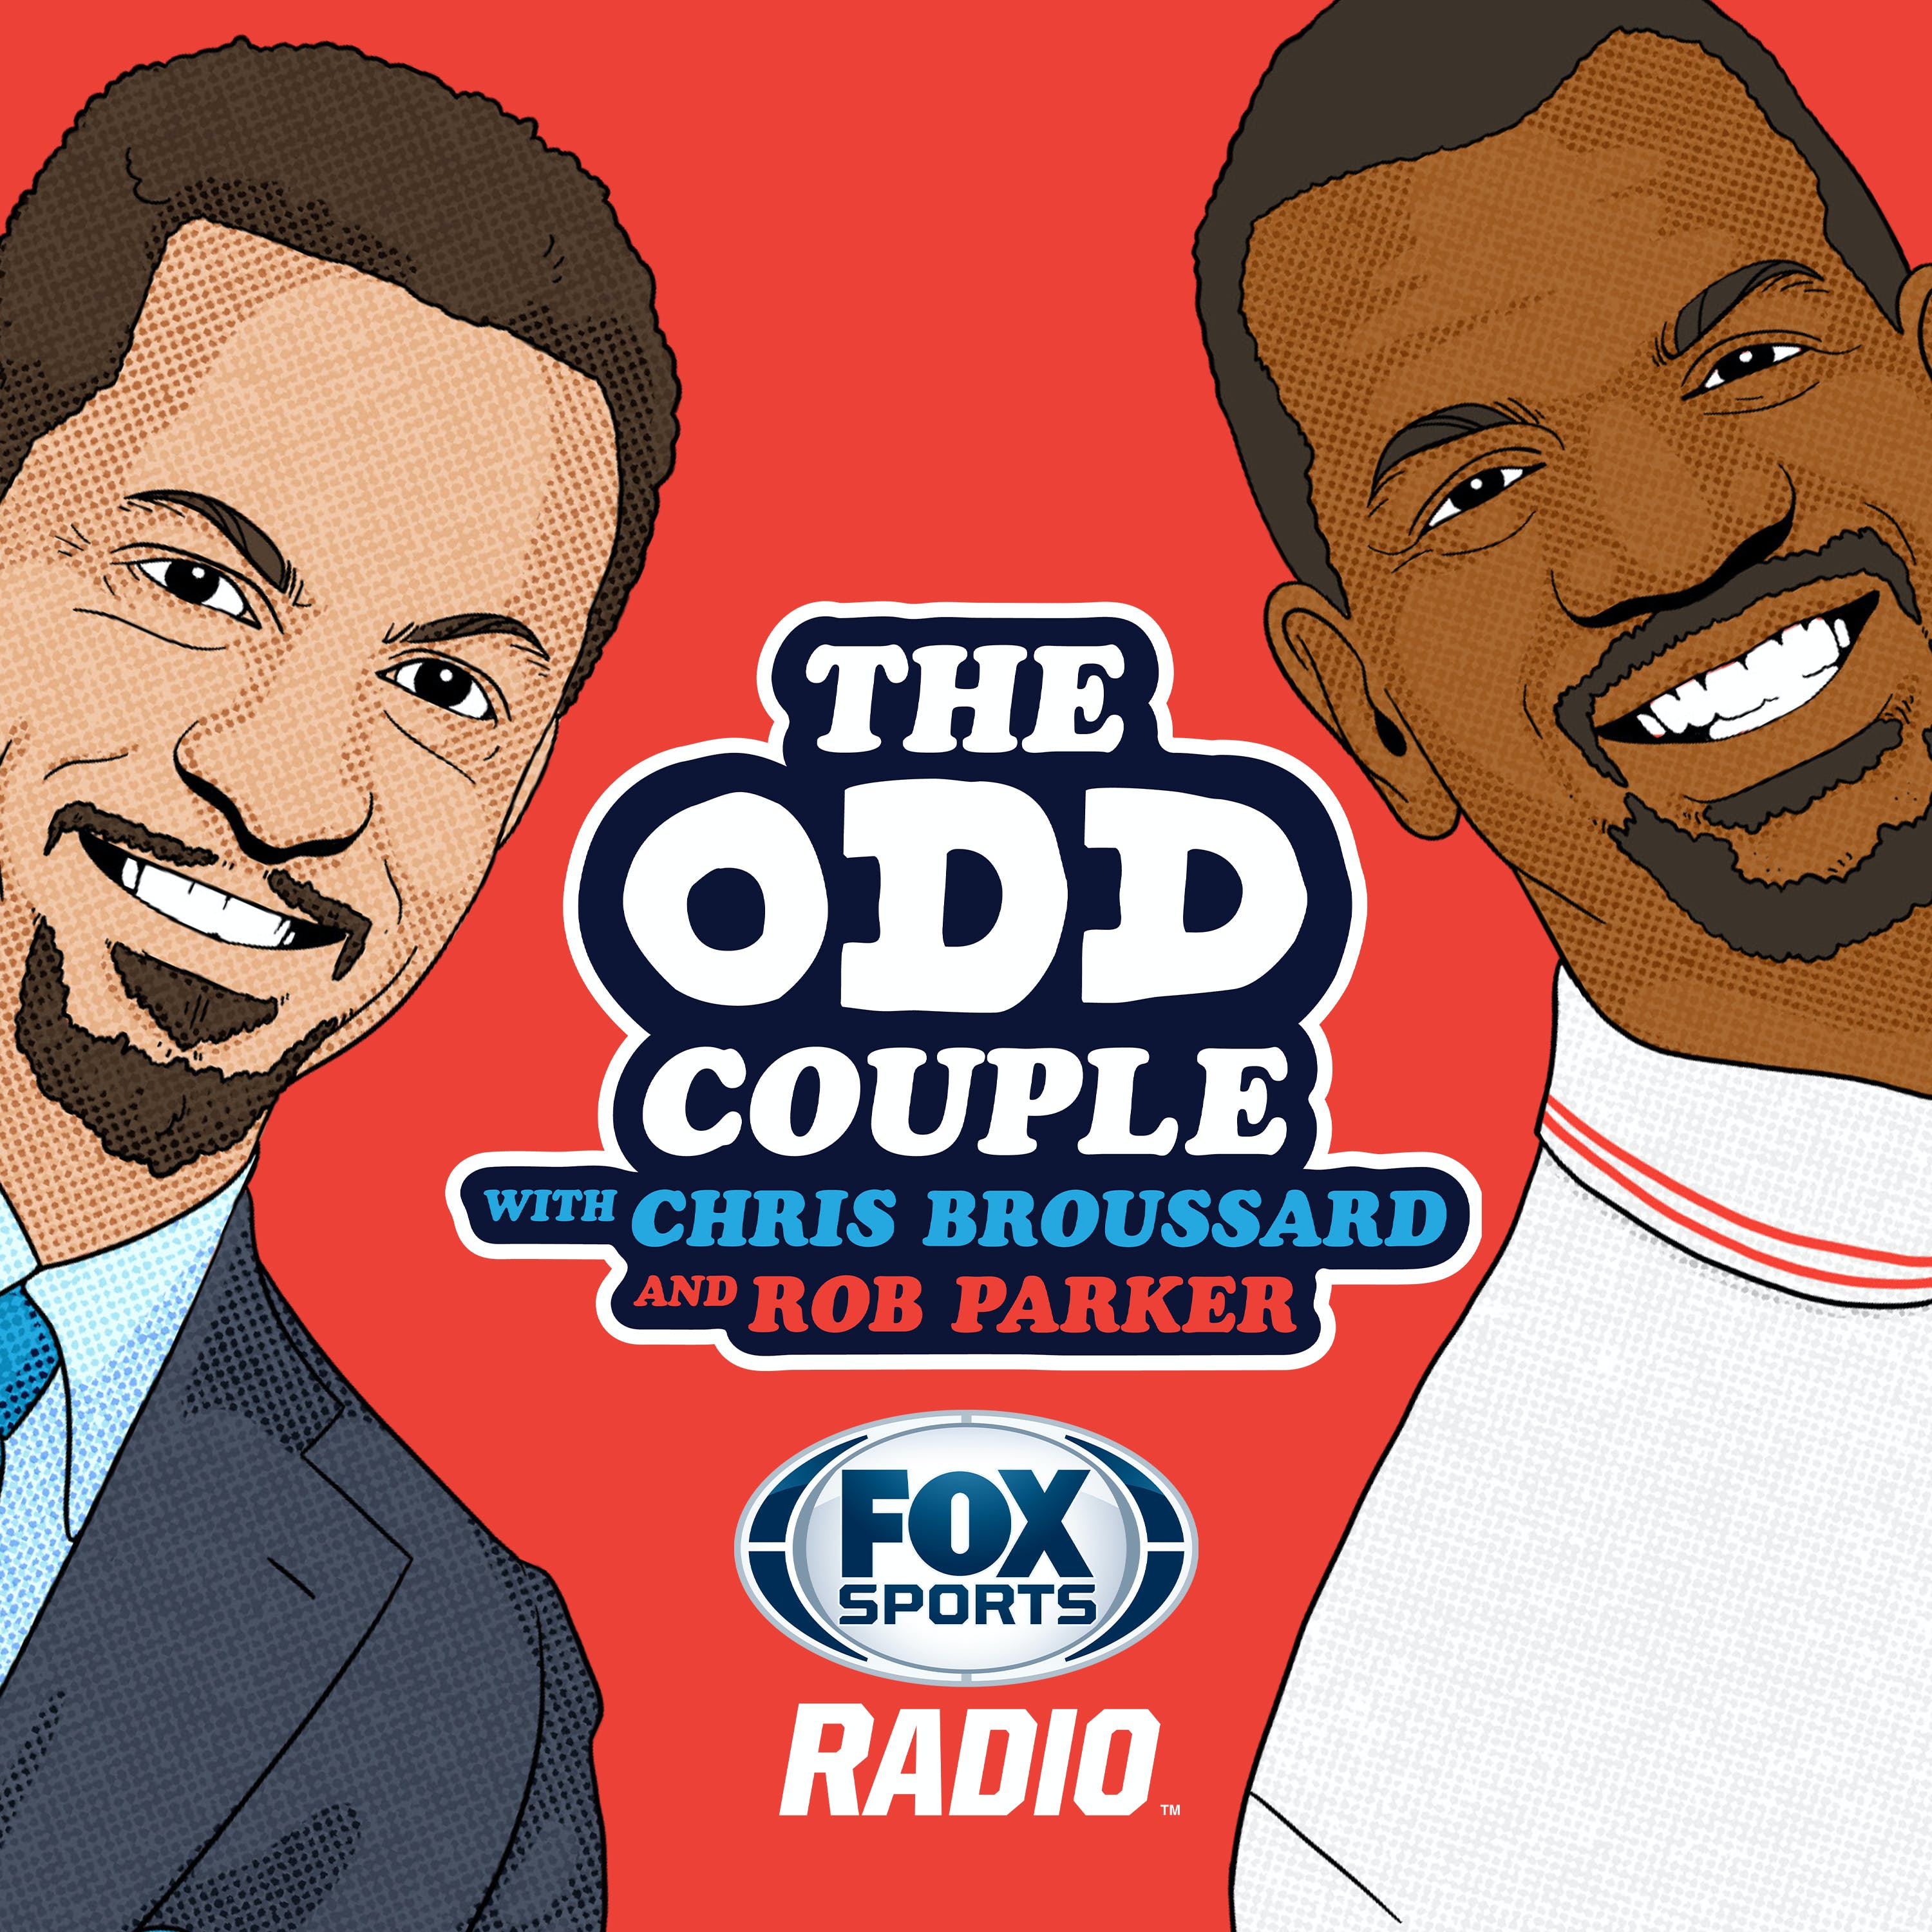 Best of The Week on The Odd Couple